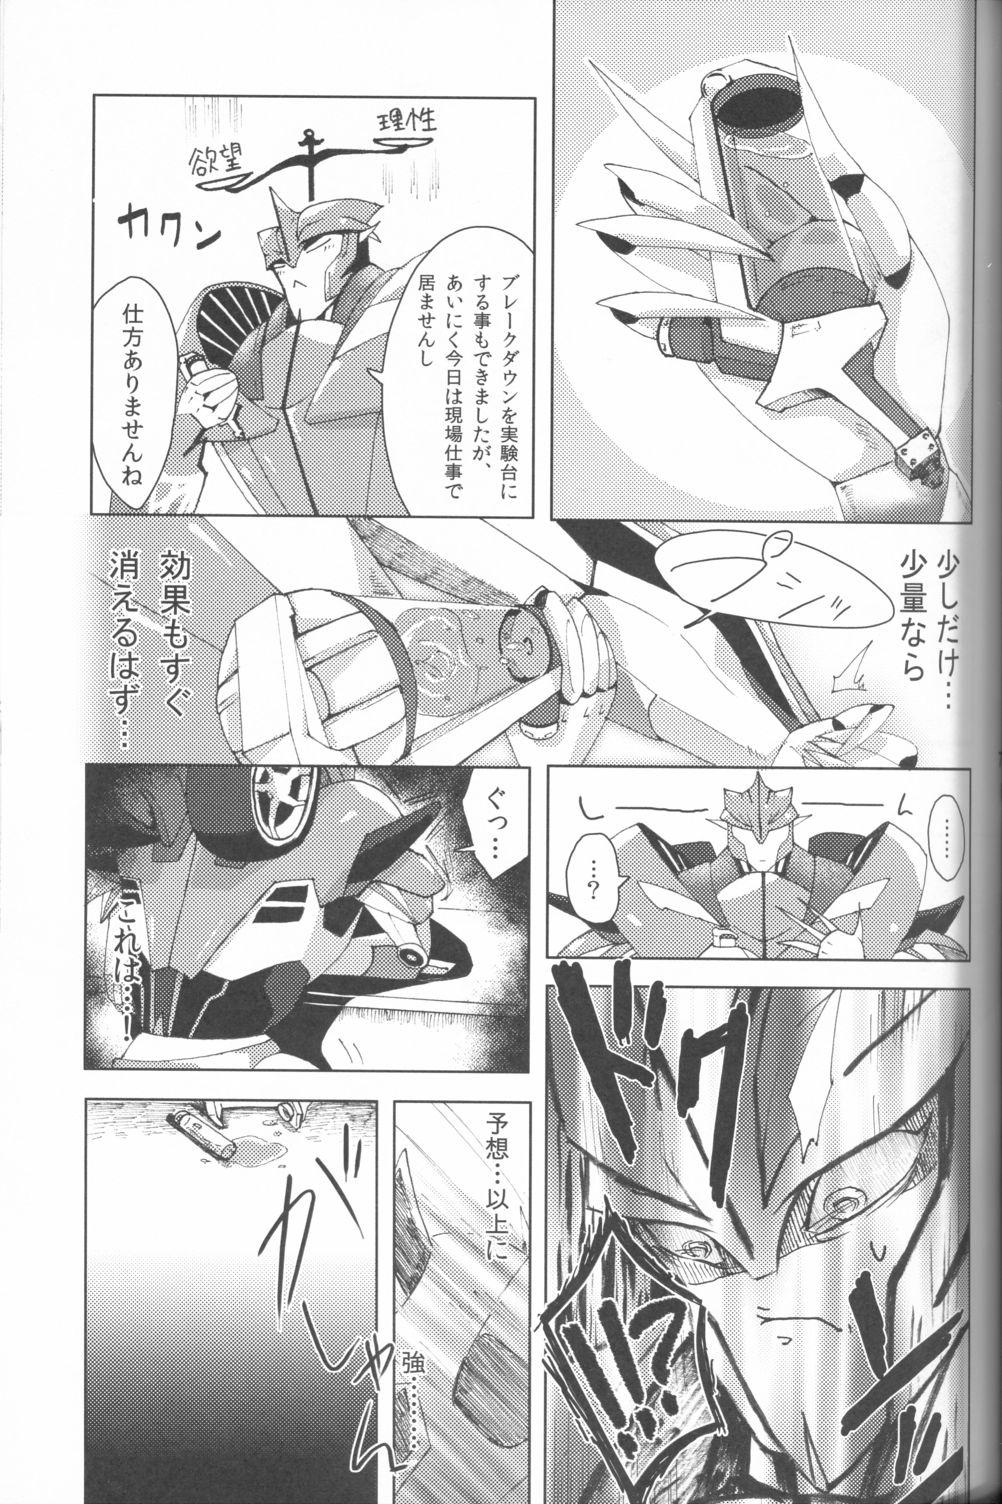 Old And Young Knock x Knock - Transformers Eat - Page 6